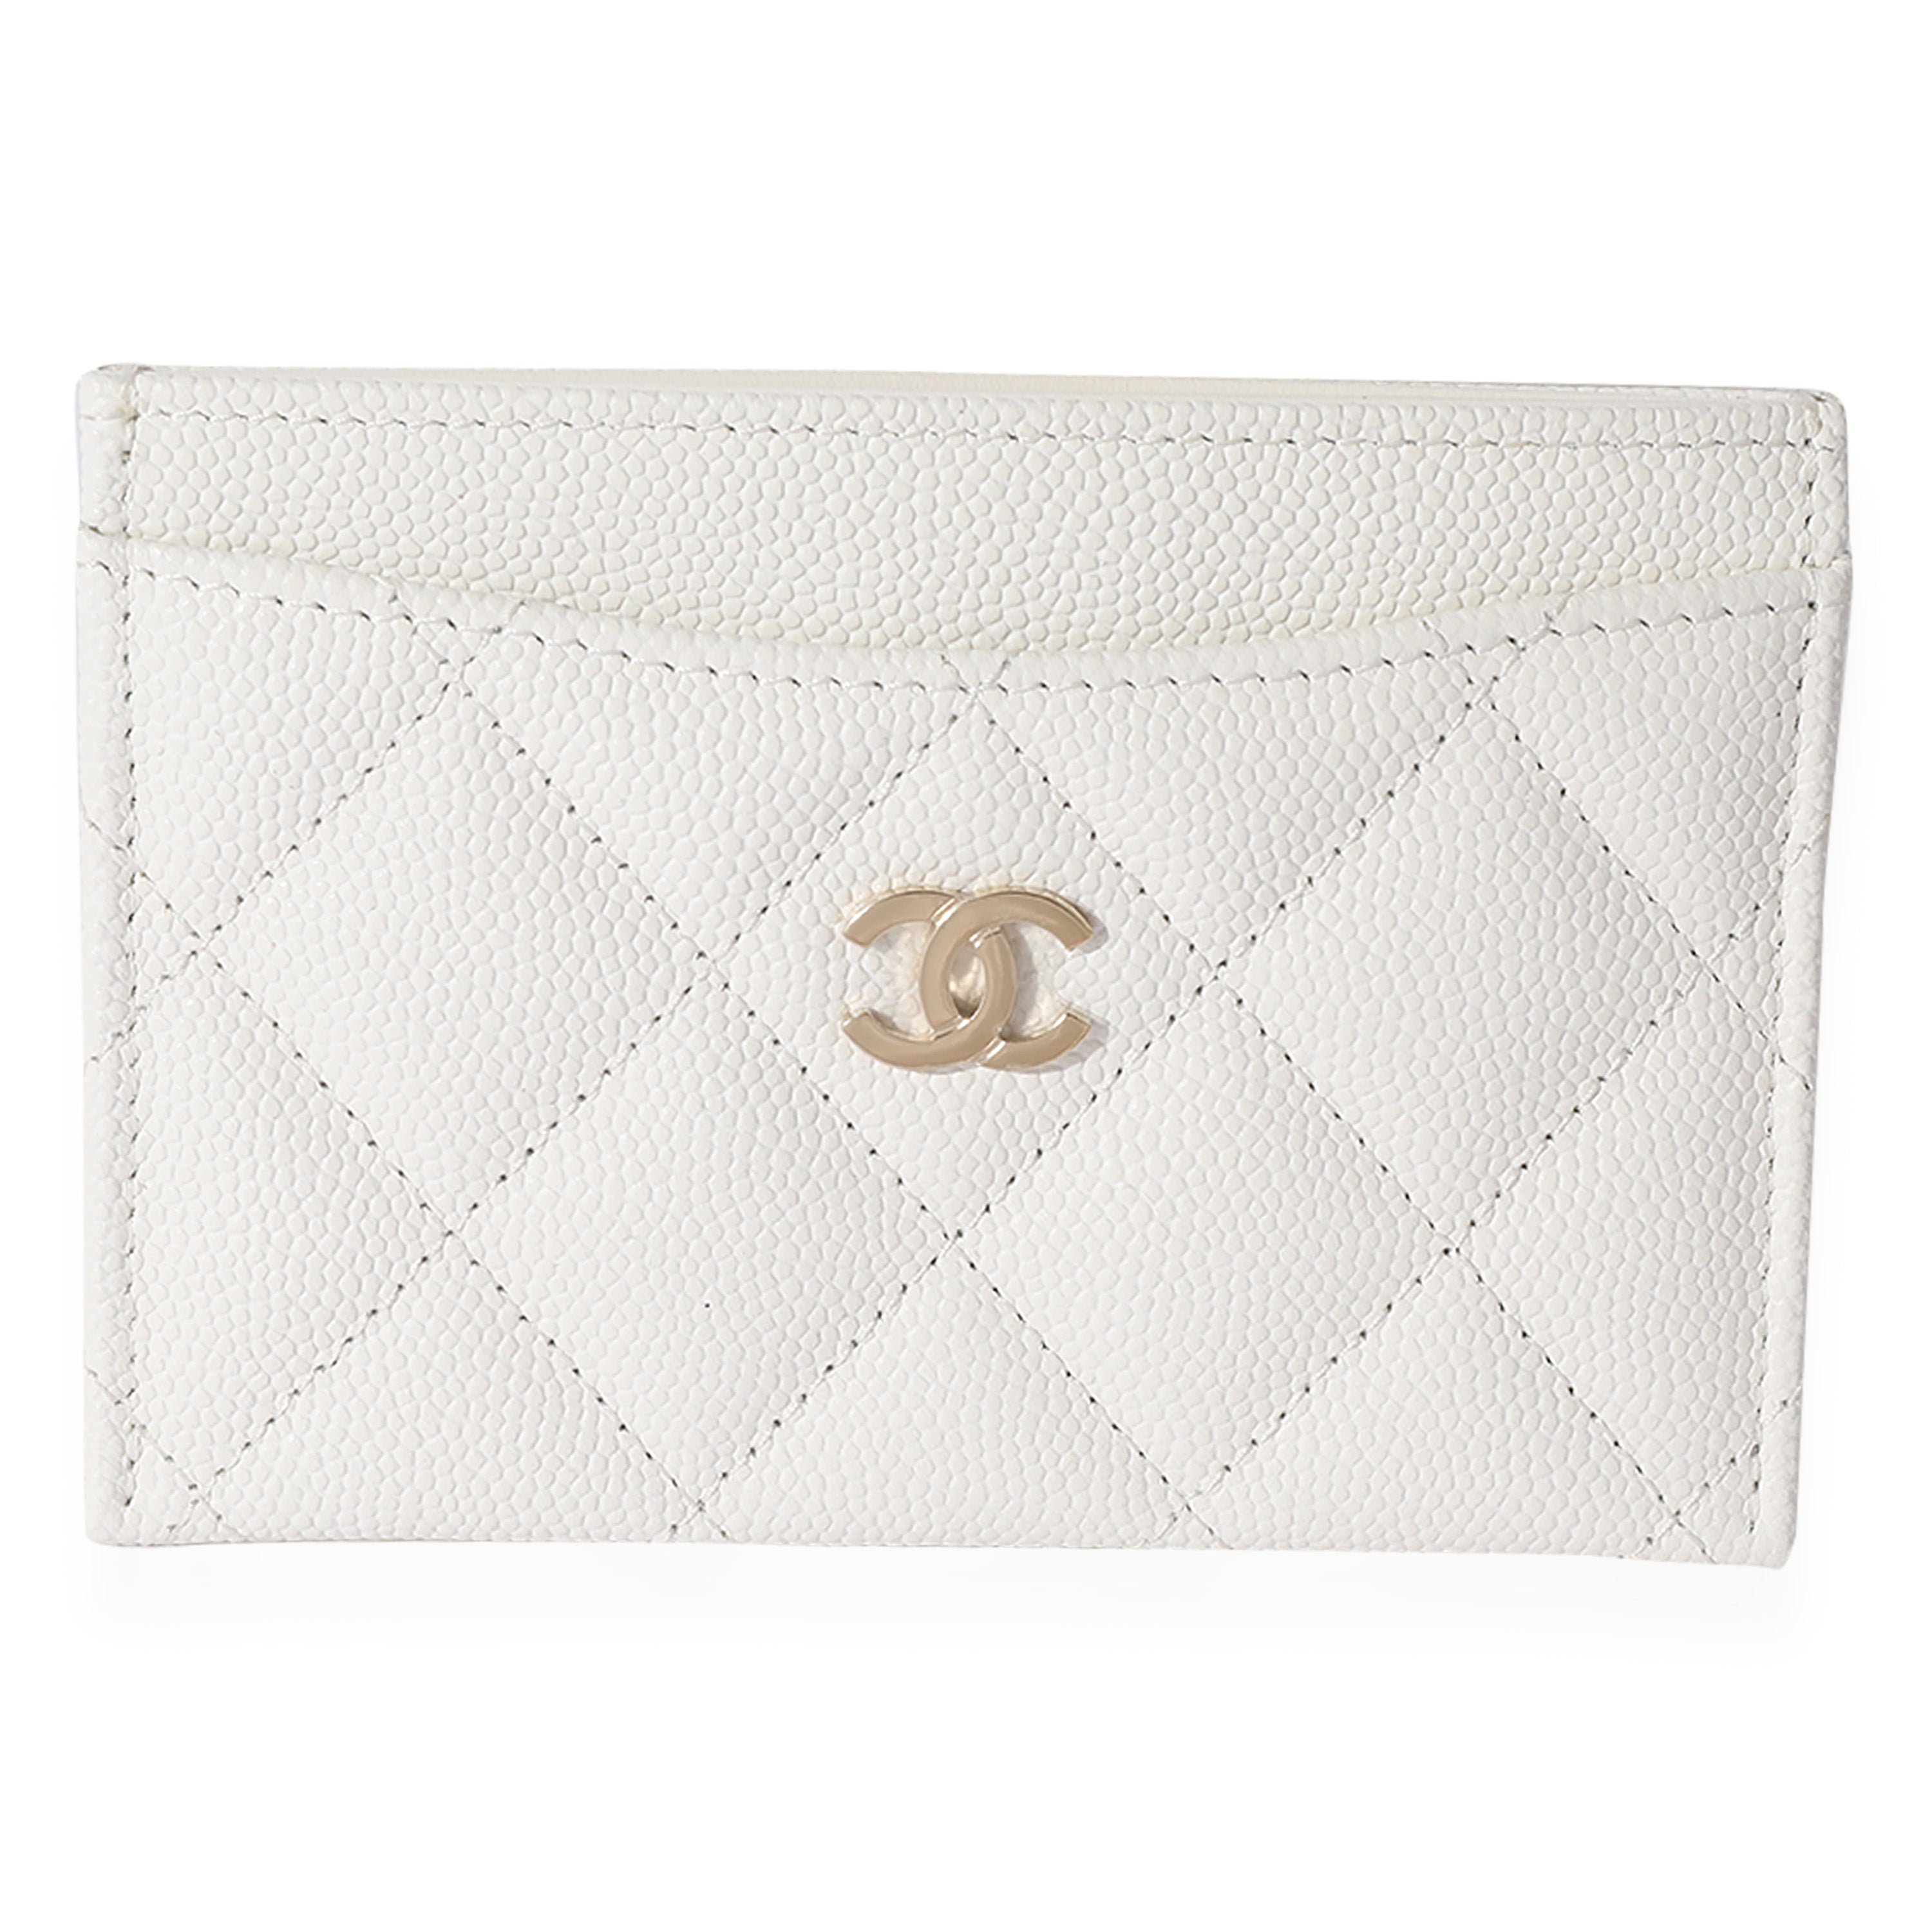 Chanel White Quilted Caviar Classic Card Holder, myGemma, SG